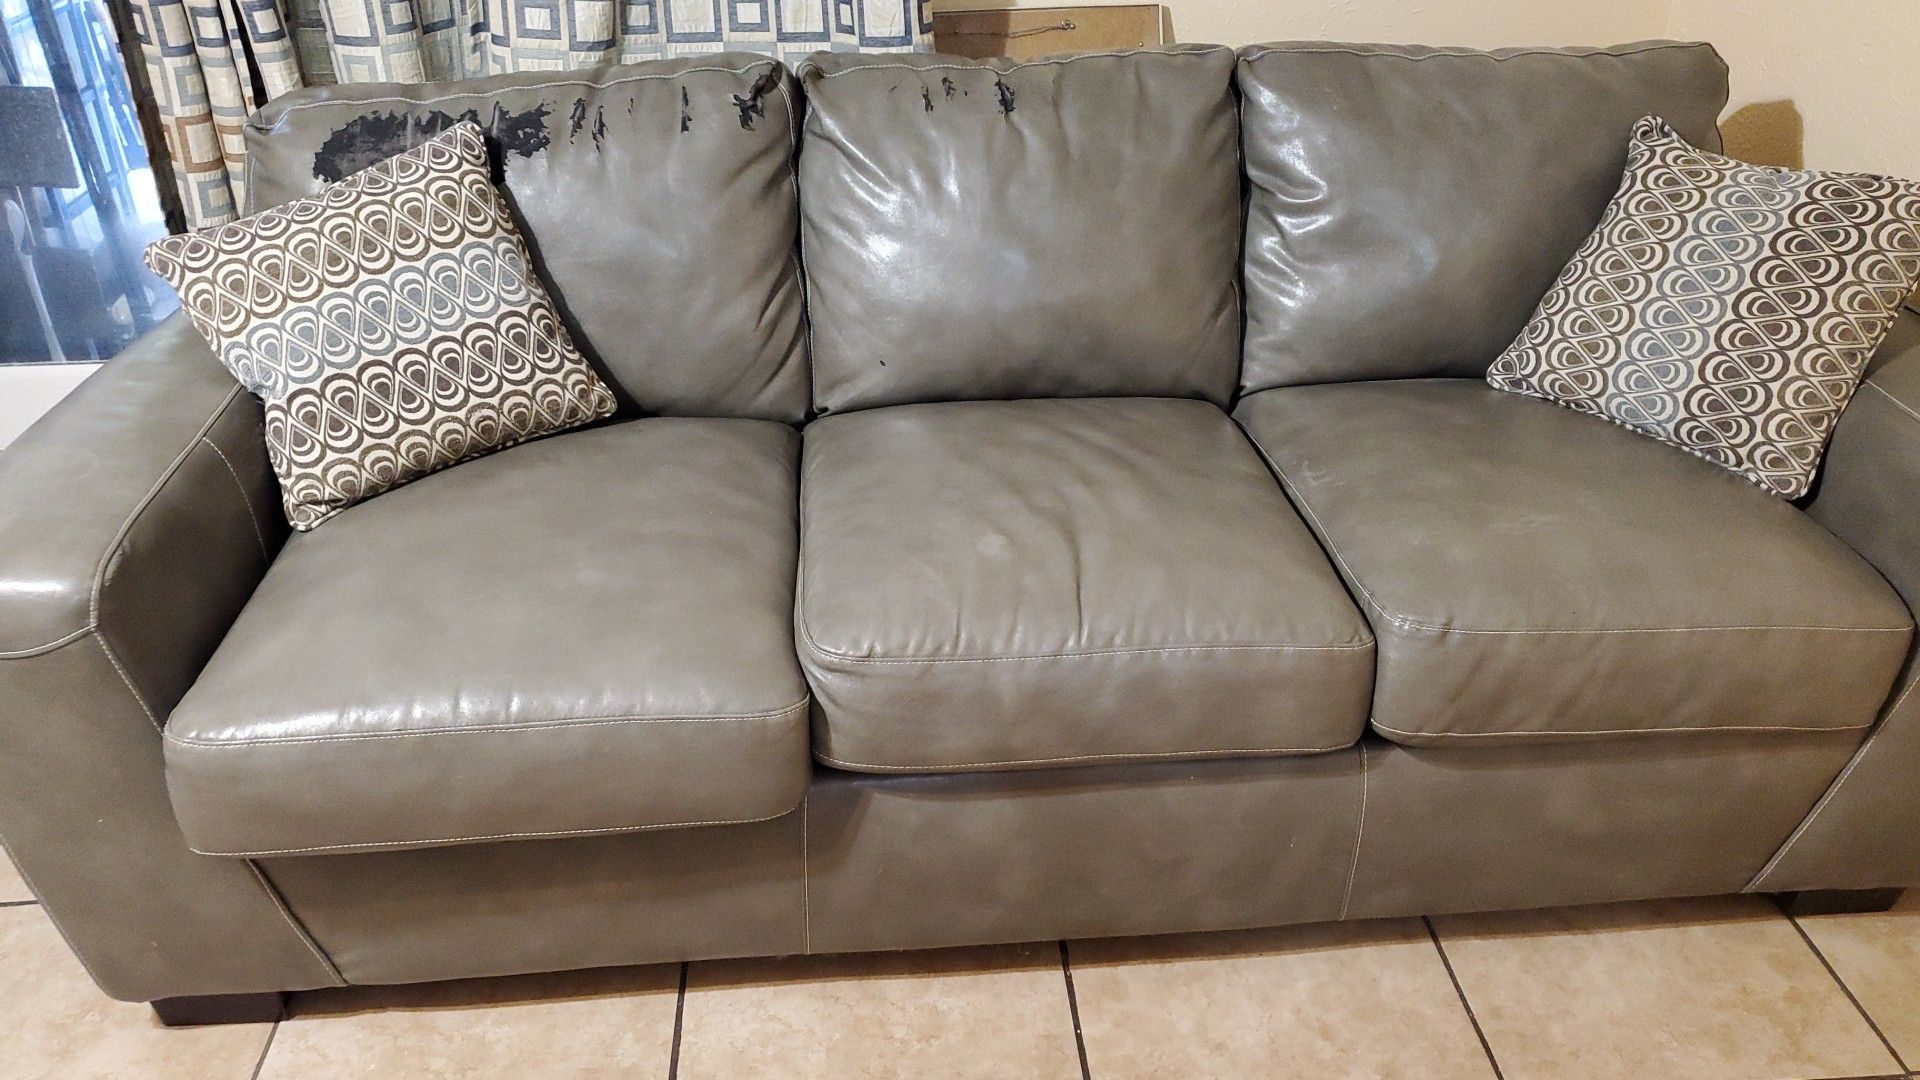 SOFA AND LOVE SEAT GRAY COLOR